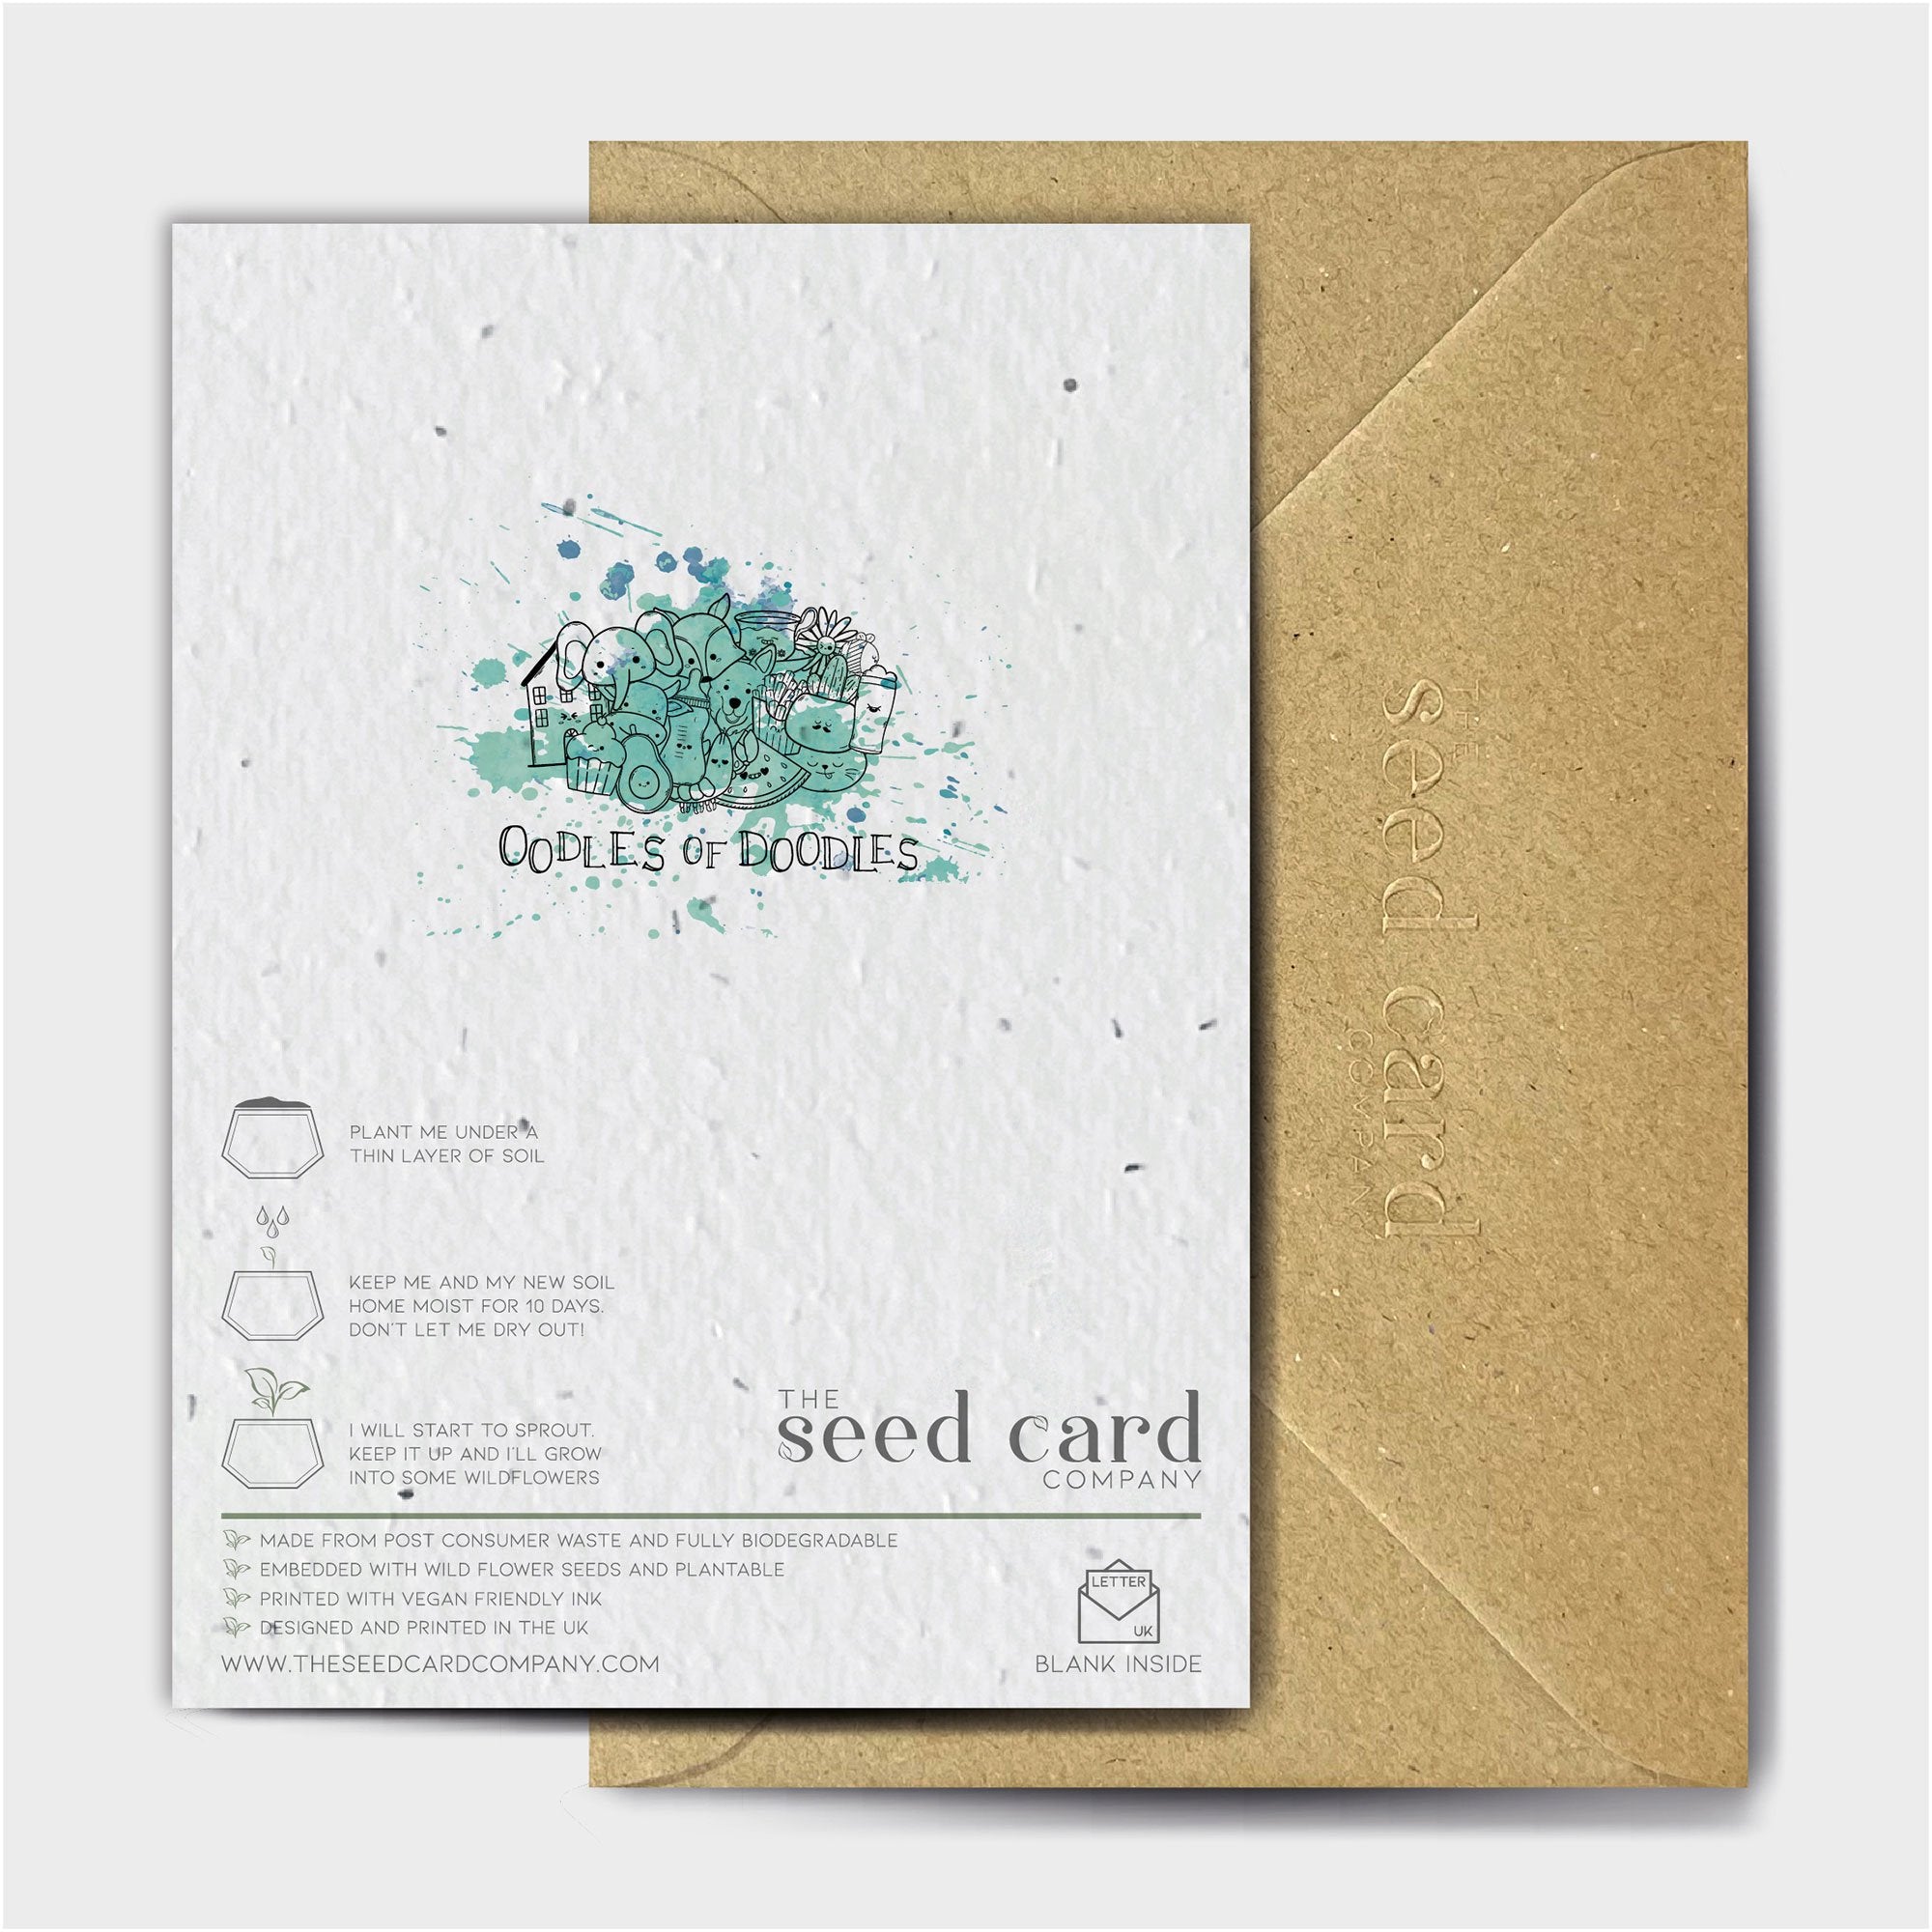 Shop online Man's Best Friend - 100% biodegradable seed-embedded cards Shop -The Seed Card Company